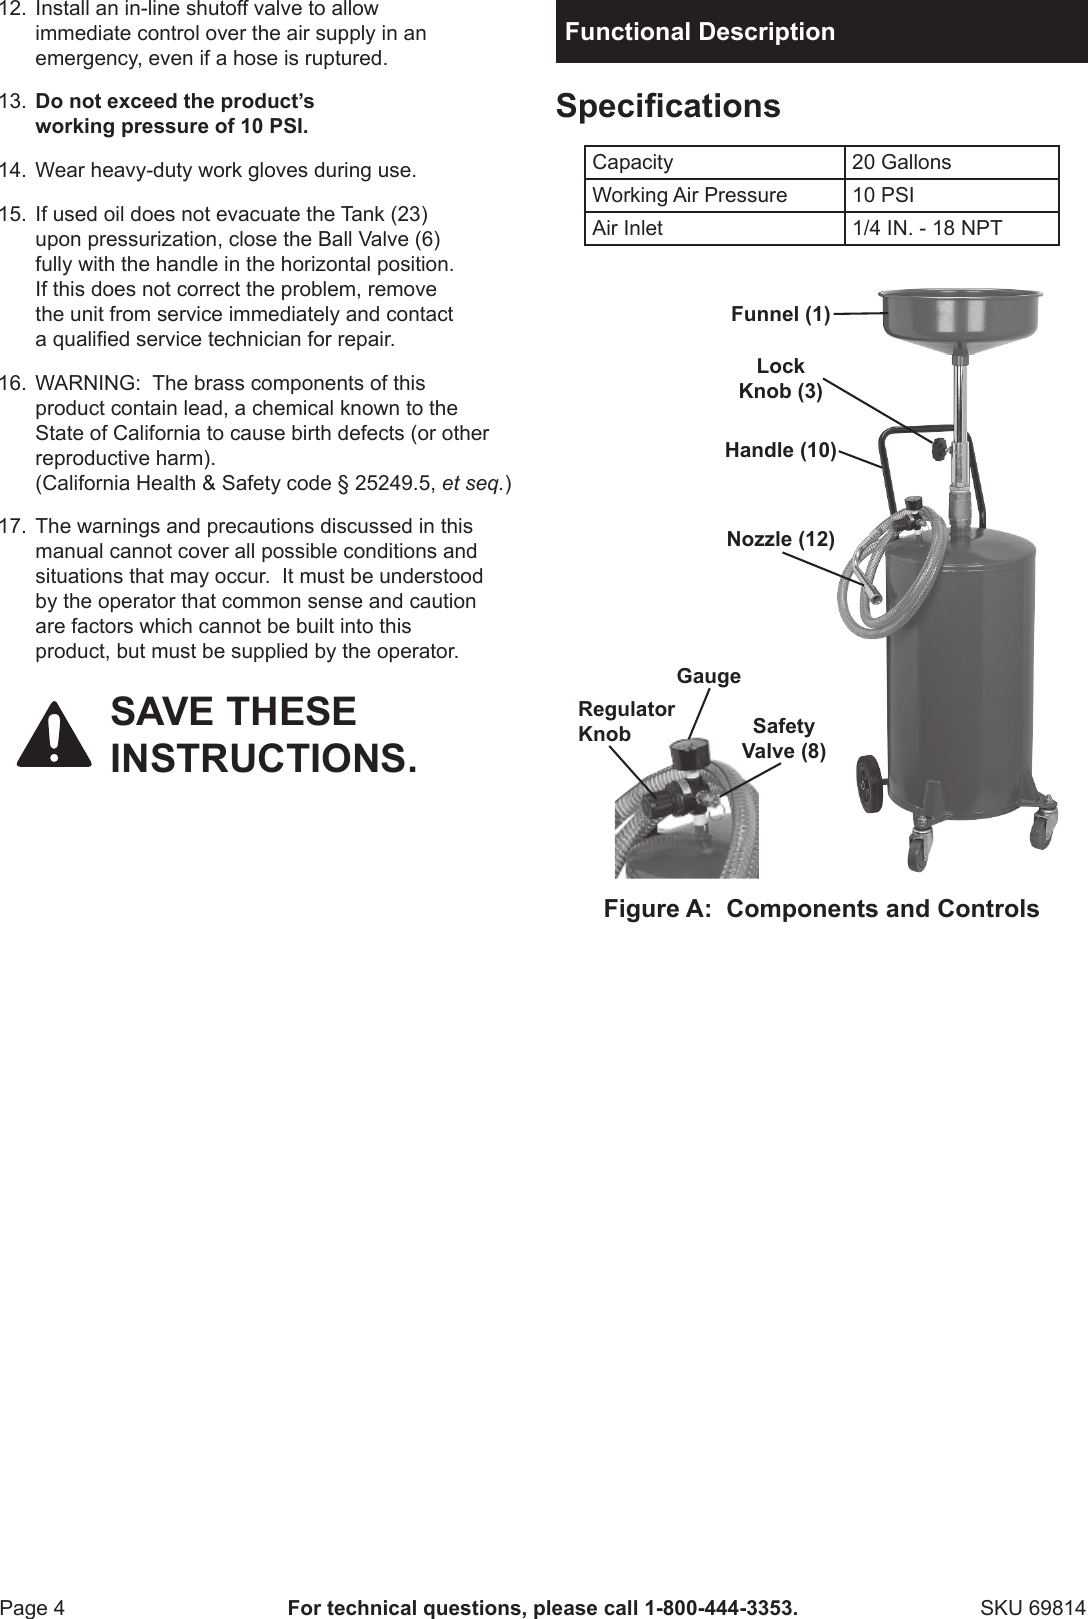 Page 4 of 12 - Harbor-Freight Harbor-Freight-20-Gal-Portable-Oil-Lift-Drain-Product-Manual-  Harbor-freight-20-gal-portable-oil-lift-drain-product-manual